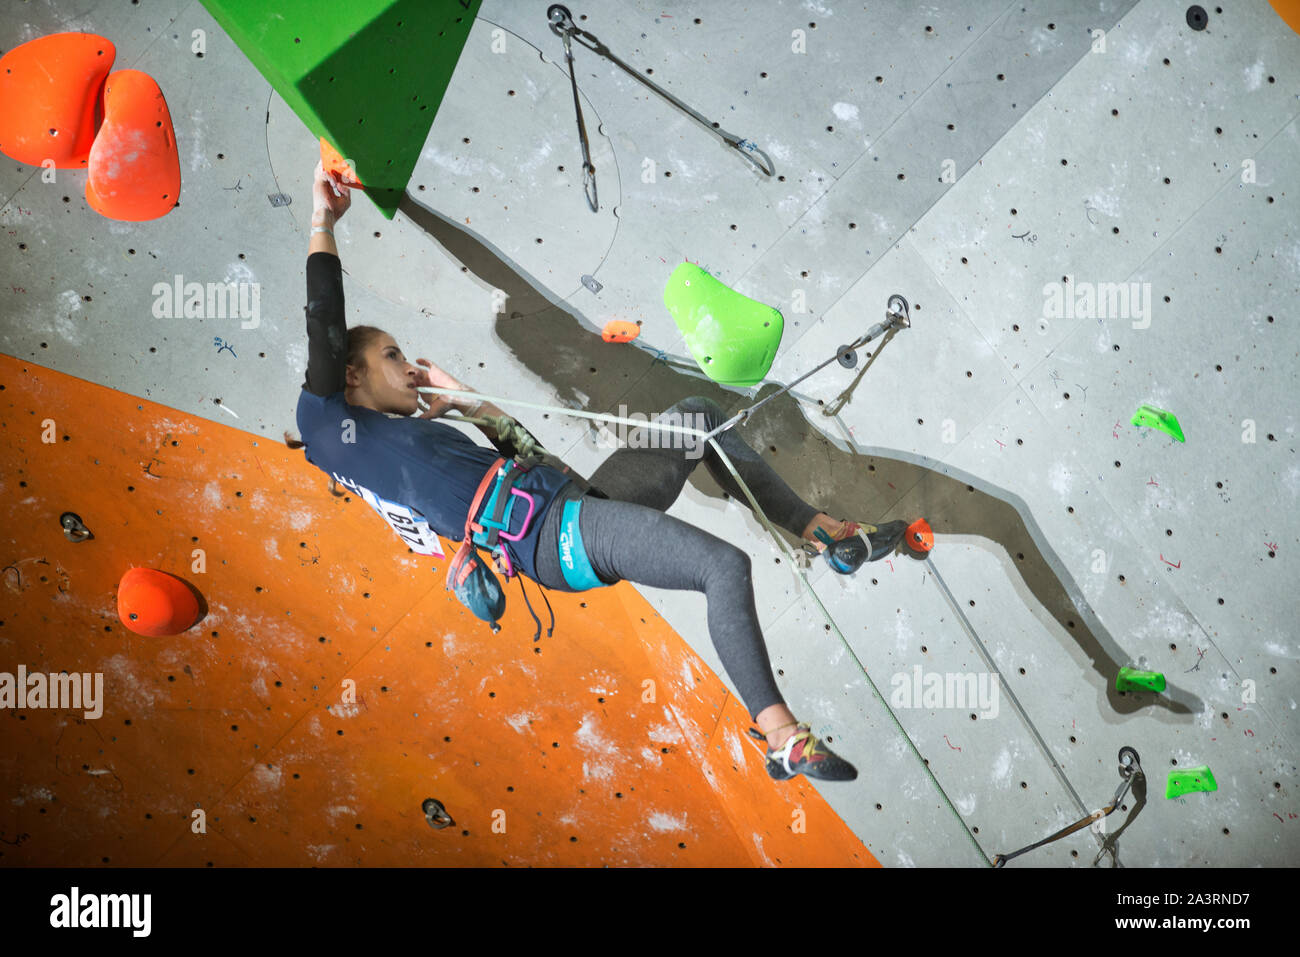 Luce  Douady of France competes in the Lead climbing womans Final on at the IFSC Climbing World Championships at the Edinburgh International Climbing Stock Photo